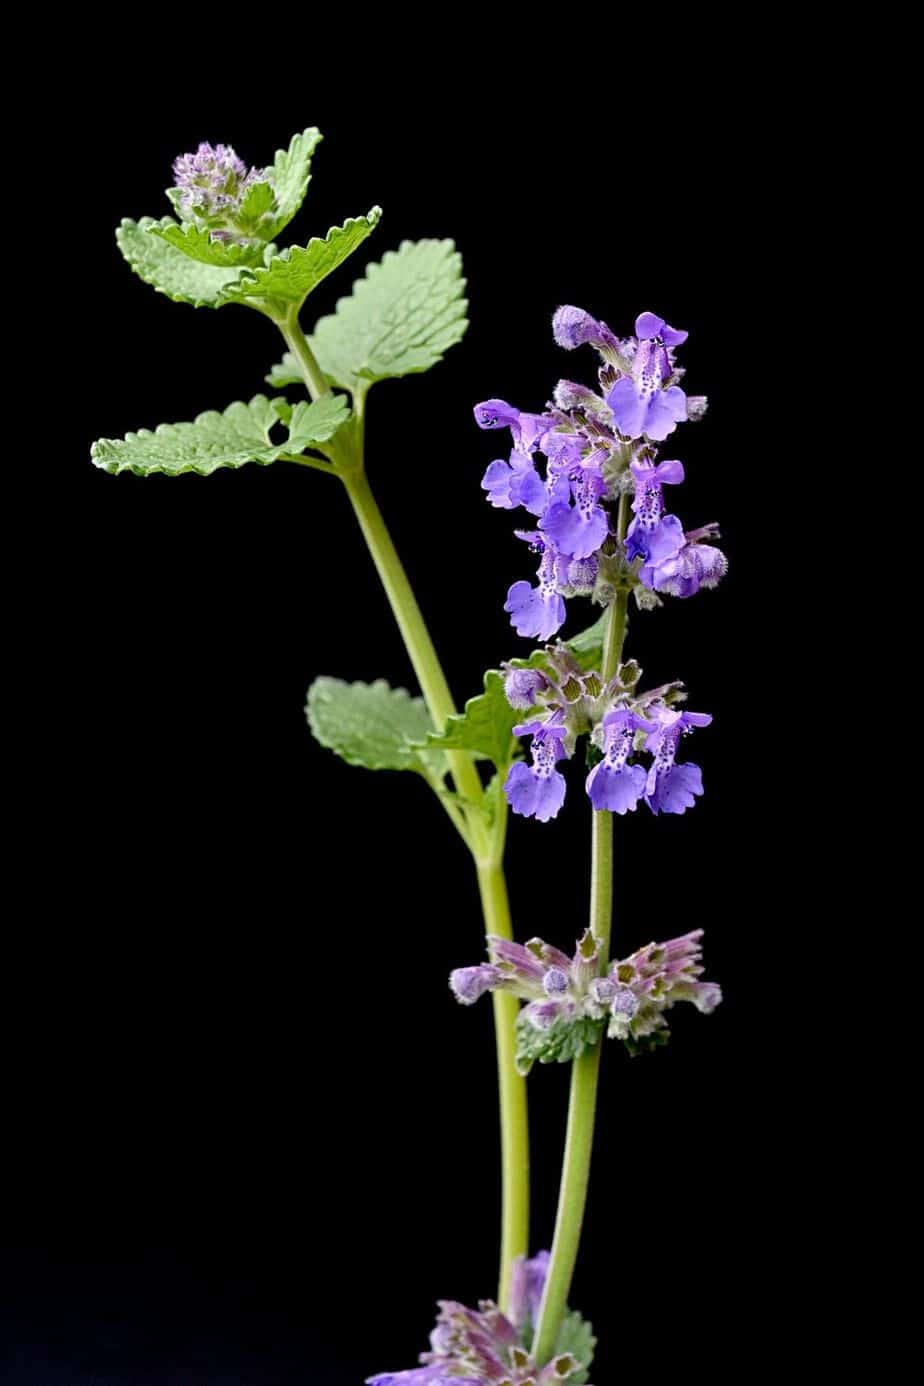 Aka Catmint, Nepeta can attract butterflies and bees to your south-facing balcony once they're fully grown